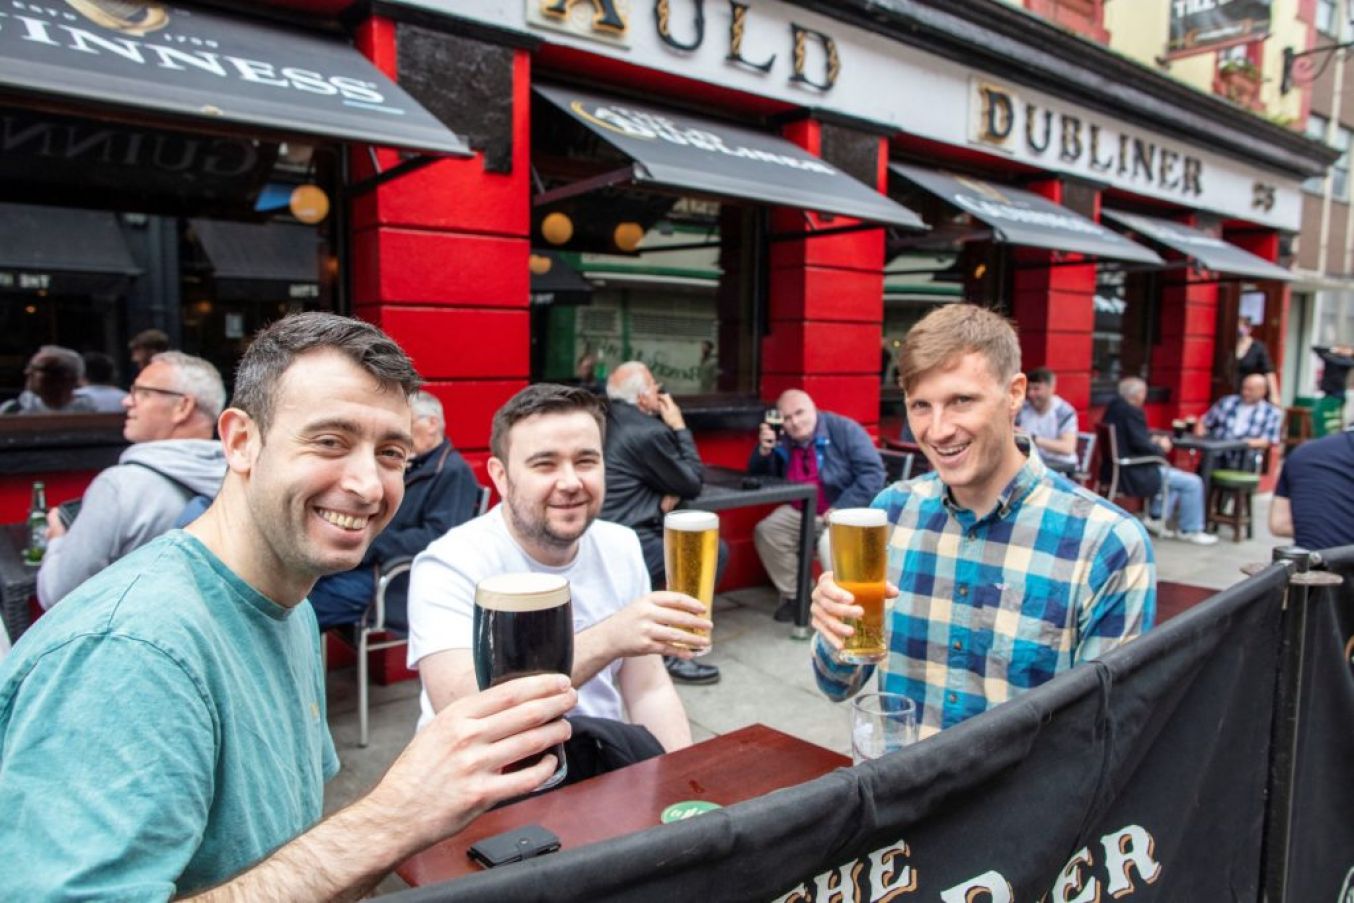 People Sit With Their Drinks At A Table Outside A Reopened Pub In Dublin. Outdoor Service For Hospitality Reopened In June. Photo: Paul Faith/Afp Via Getty